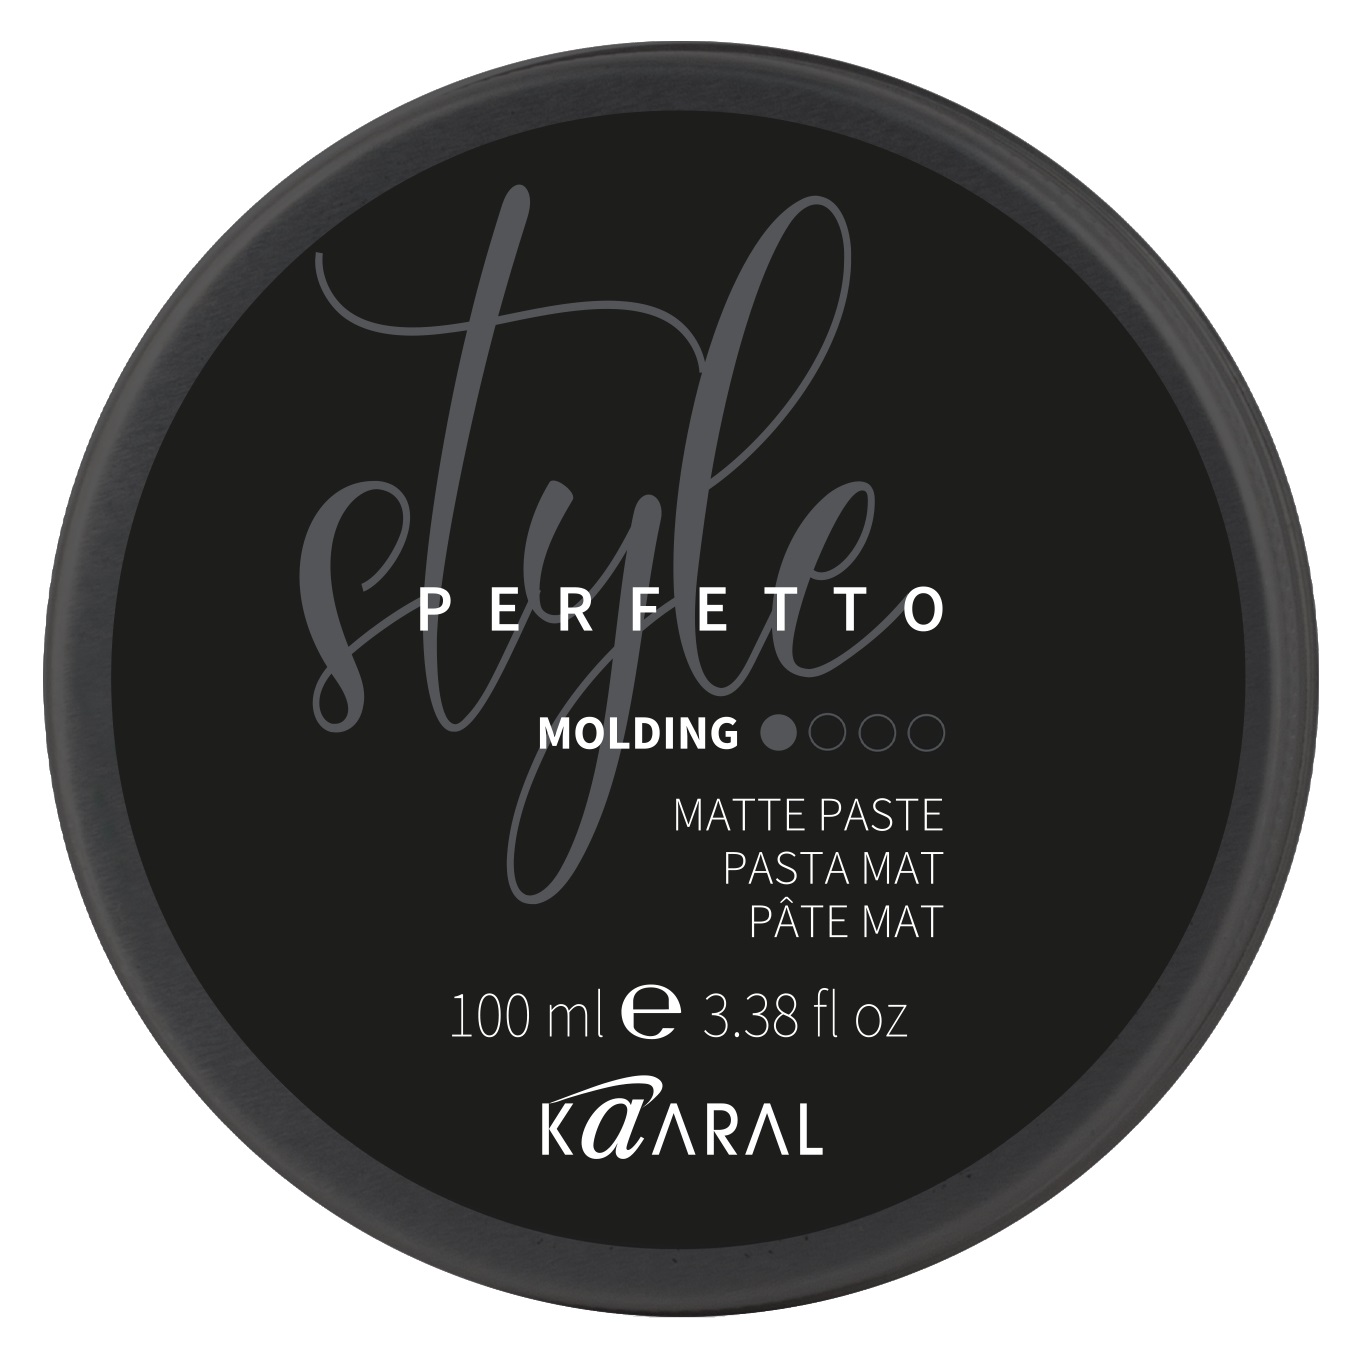 Kaaral Матовая паста Molding Matte Paste, 100 мл (Kaaral, Style Perfetto) kaaral крем style perfetto insta curls 150 мл 150 г